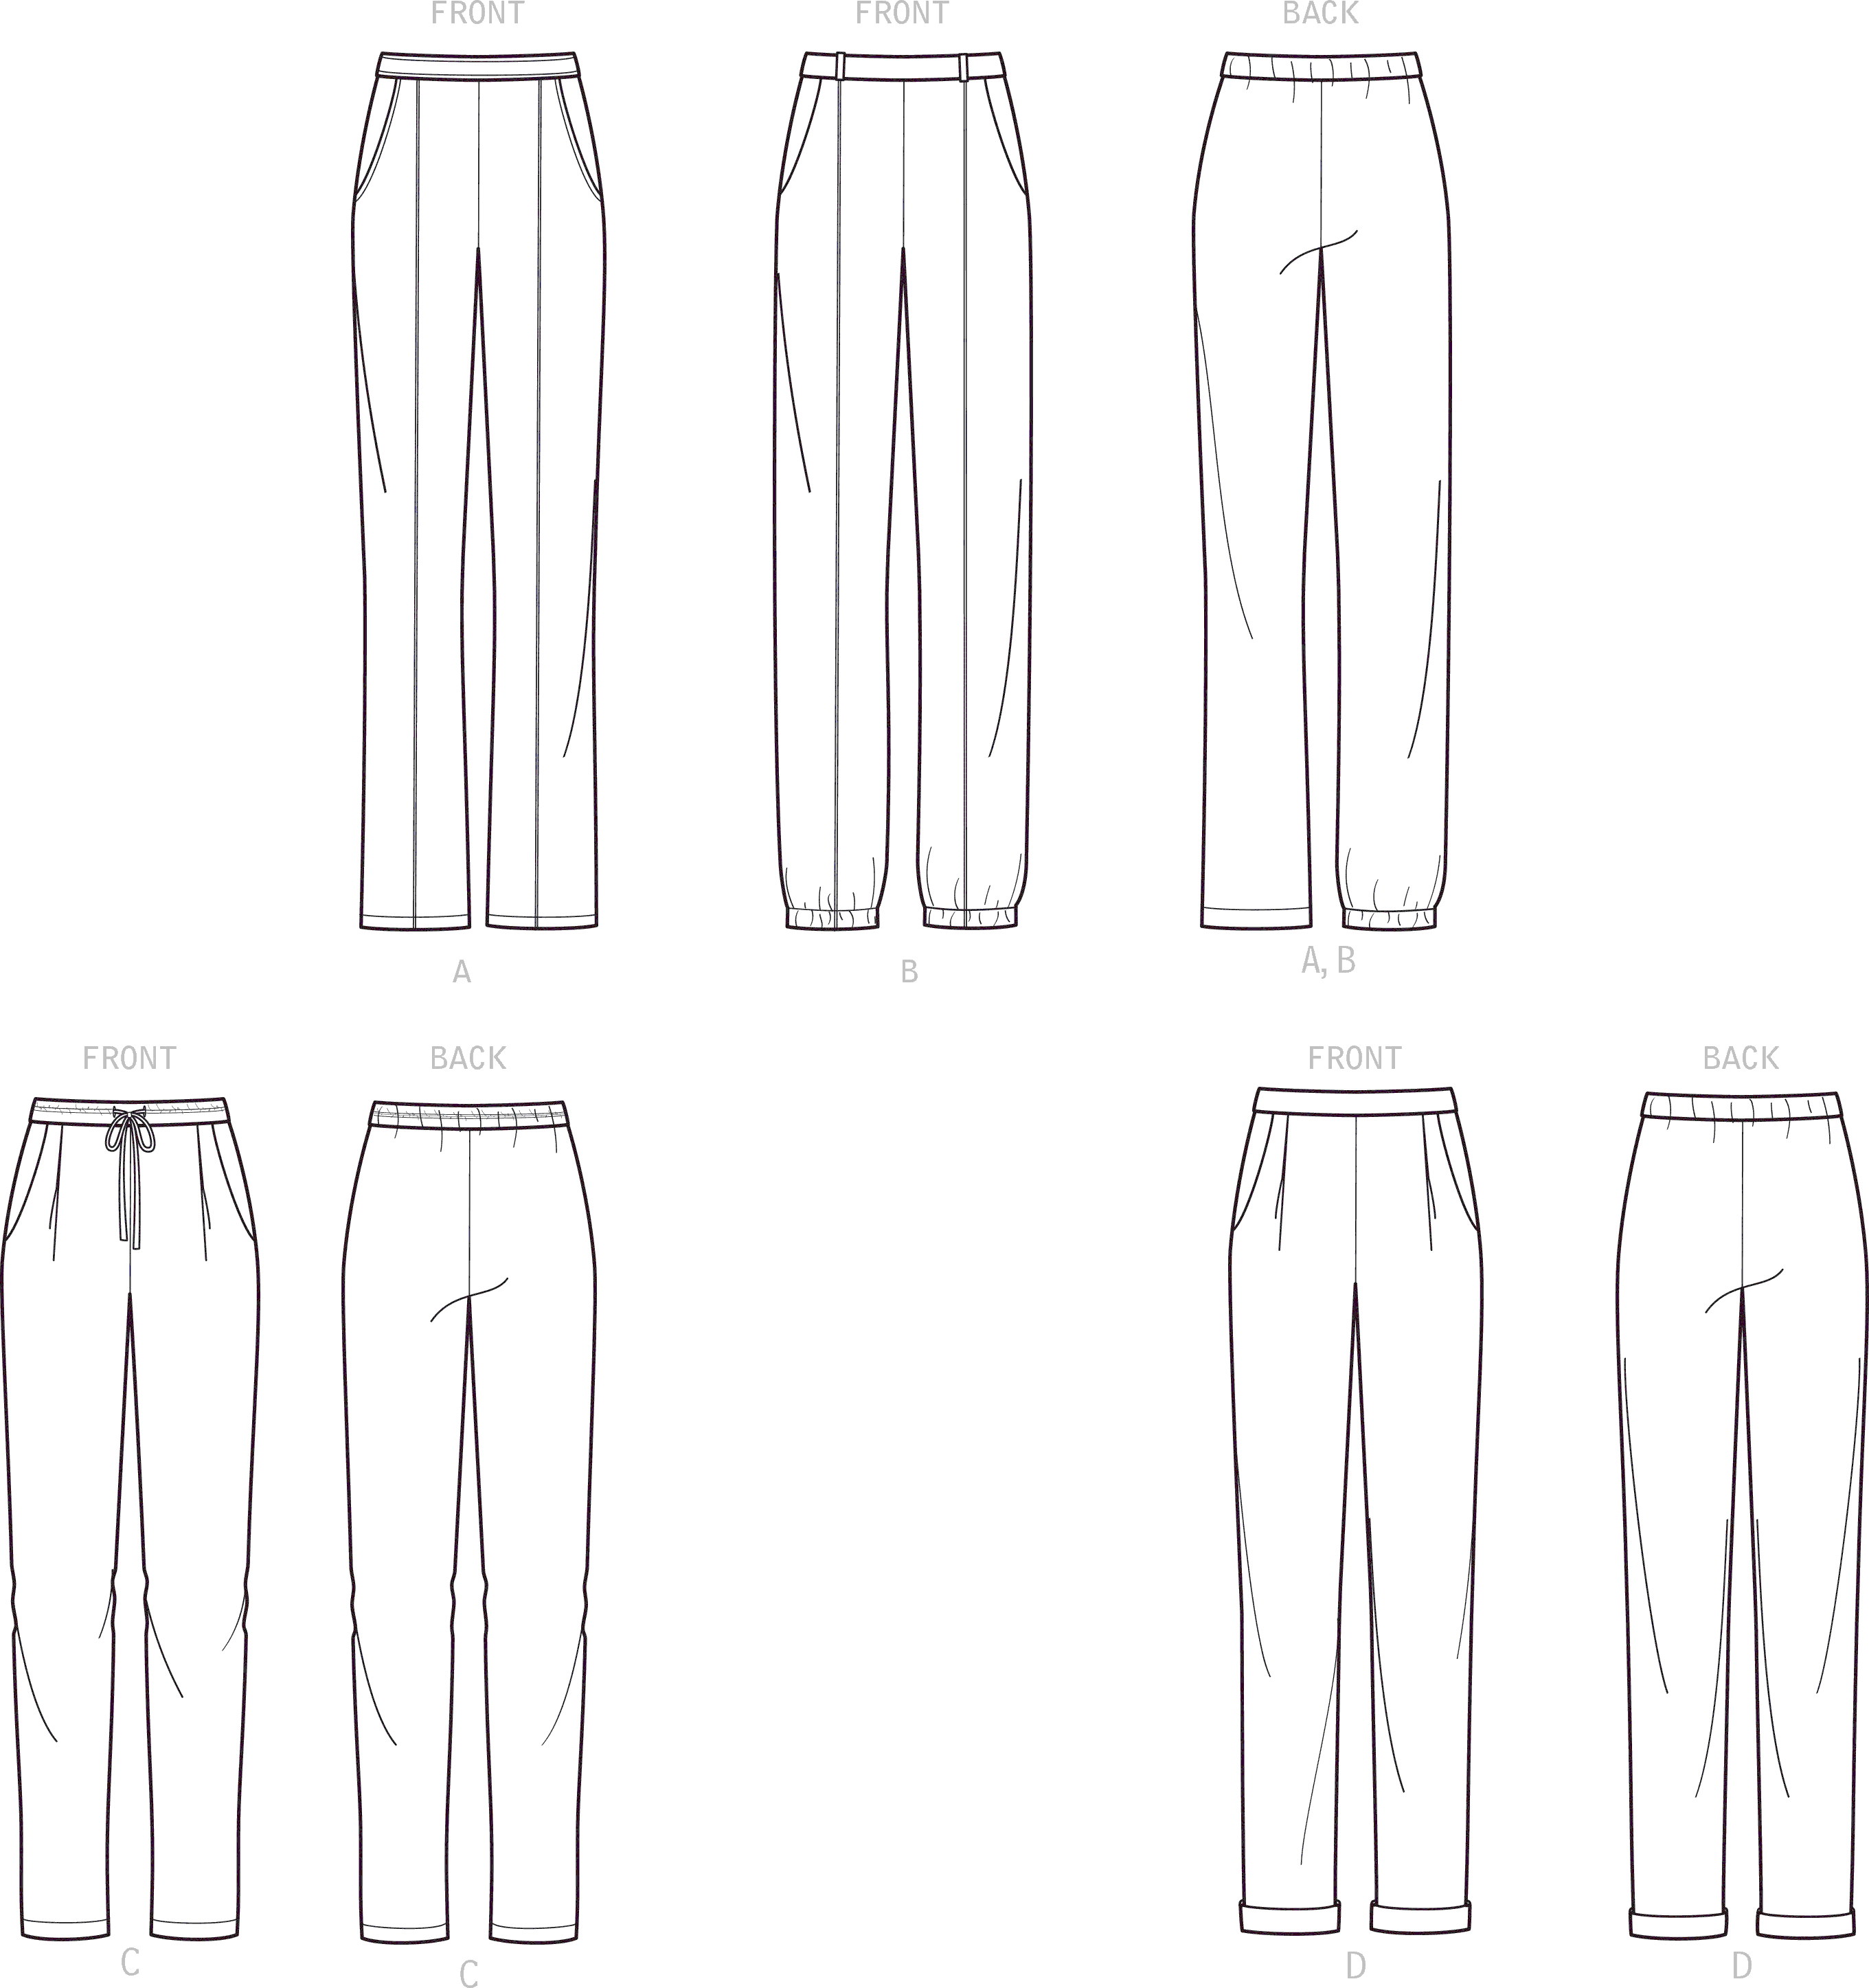 S9376  Simplicity Sewing Pattern Misses' Pull-on Trousers